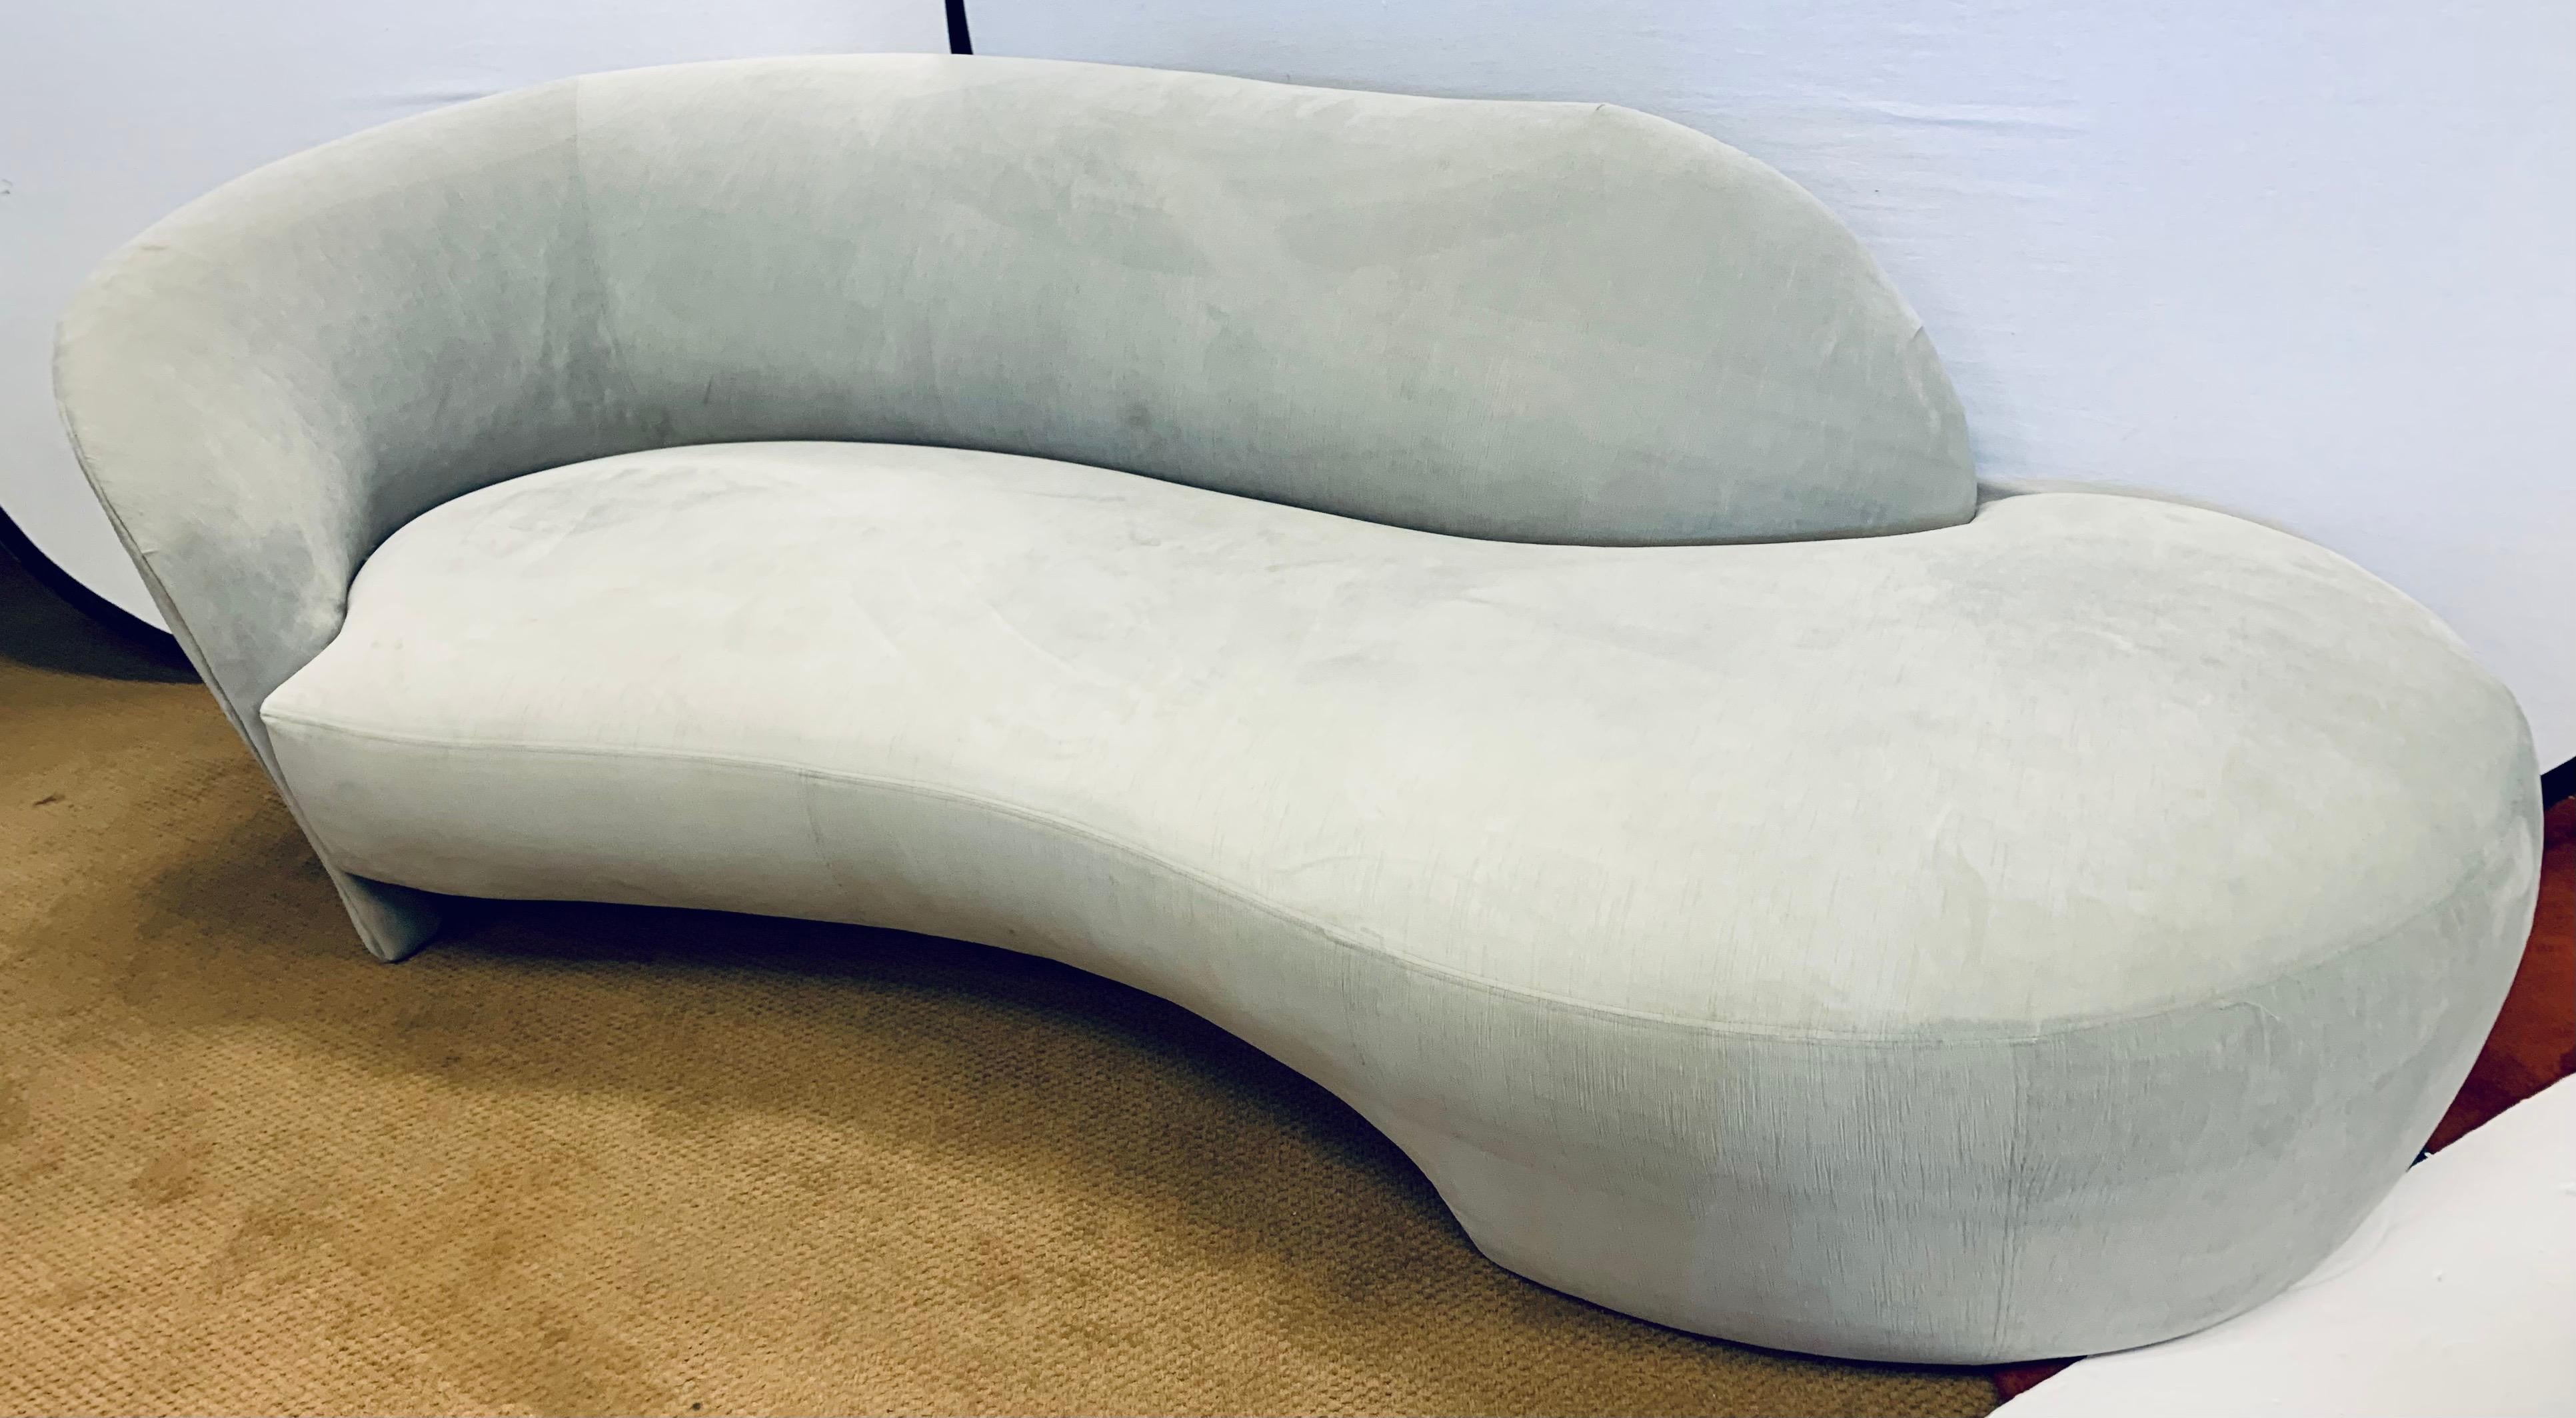 Stunning organic sculptural serpentine sofa after with great scale and lines to die for. The luxurious gray velvet fabric is less than two years old and is still in very good condition save for a spot or two - see pics. This sofa will be the most